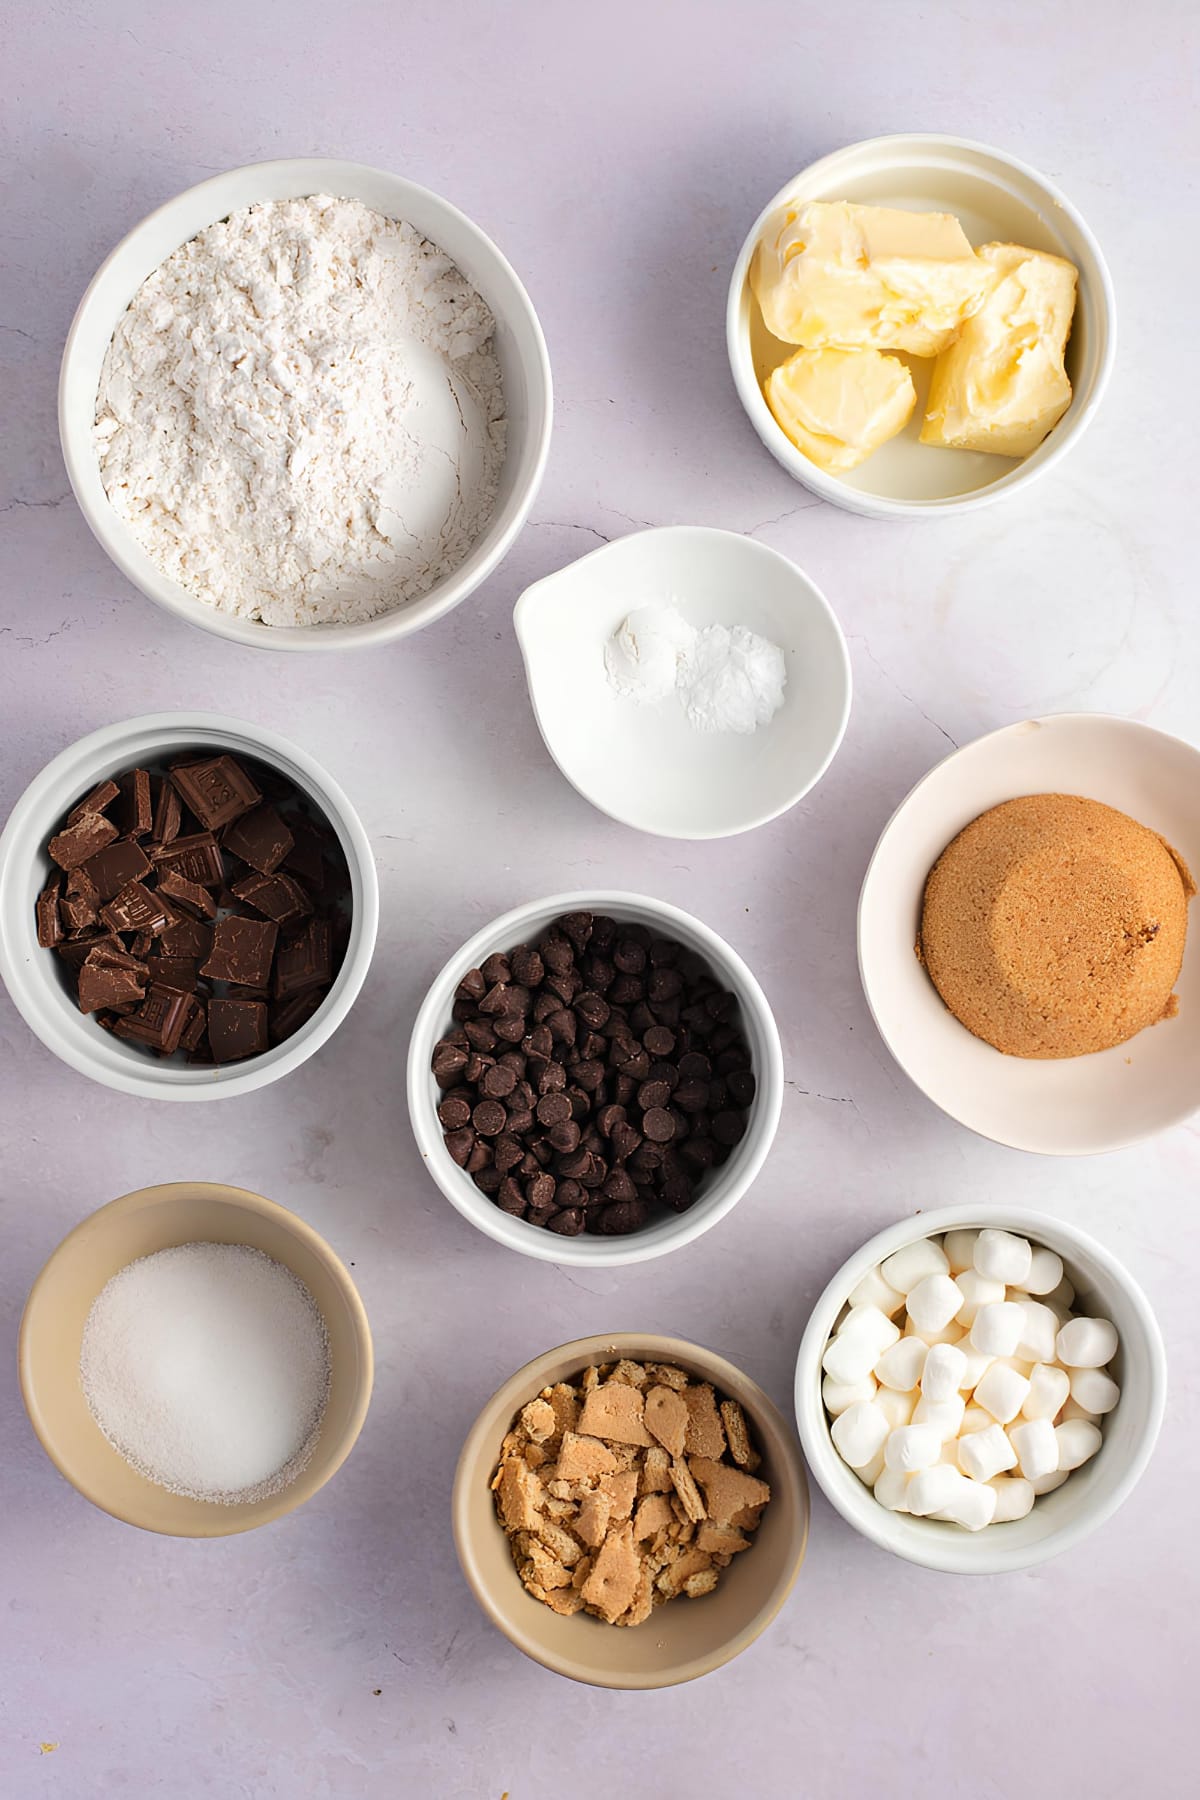 Butter, brown sugar
,flour, chocolate chips, marshmallows, Hershey's bars and graham crackers on bowls flat lay on a white table surface.